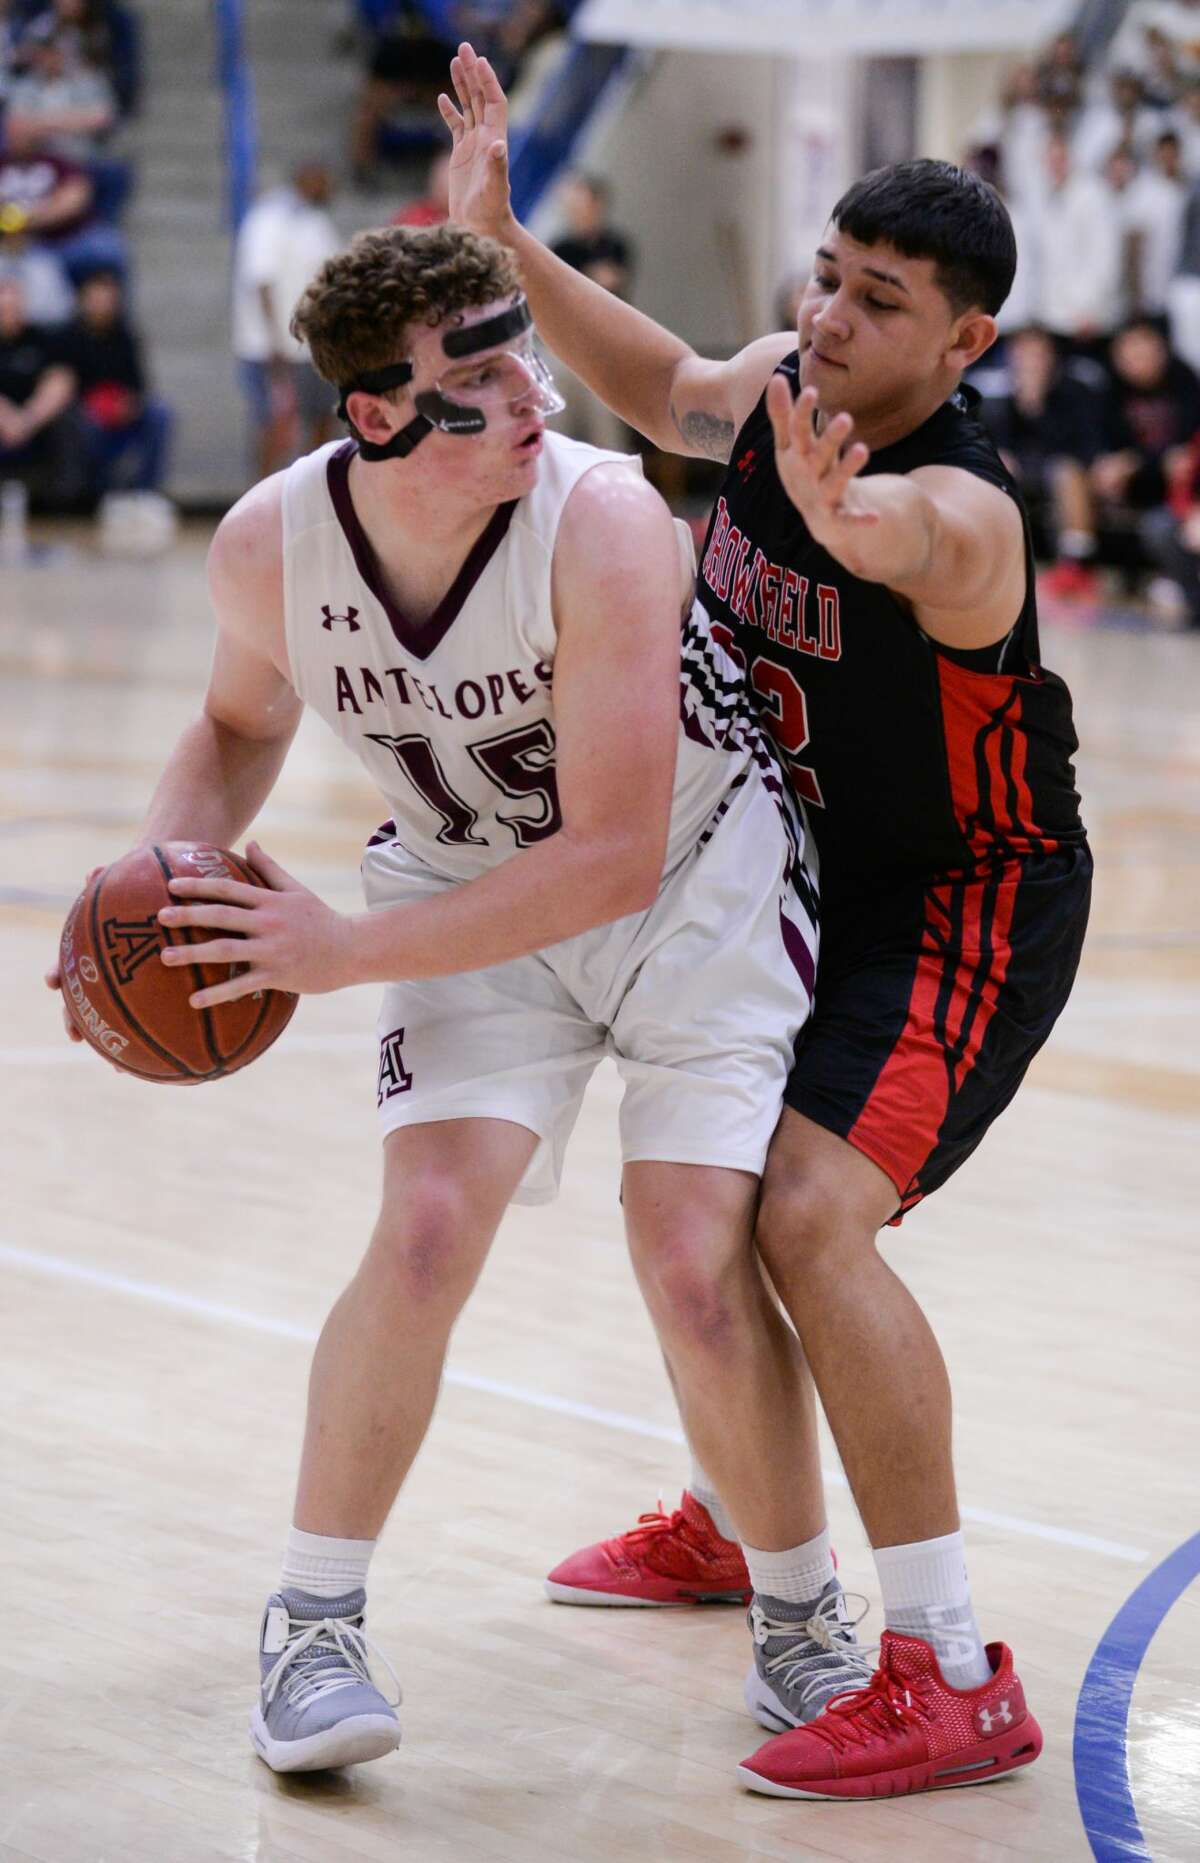 Abernathy's Miles Keith (15) looks for an open teammate from outside the 3-point line during the Region 1 3A regional quarterfinal game against Brownfield Tuesday, Feb. 26, 2019 at Rip Griffin Center in Lubbock, TX. Brownfield defeated Abernathy 71-43.